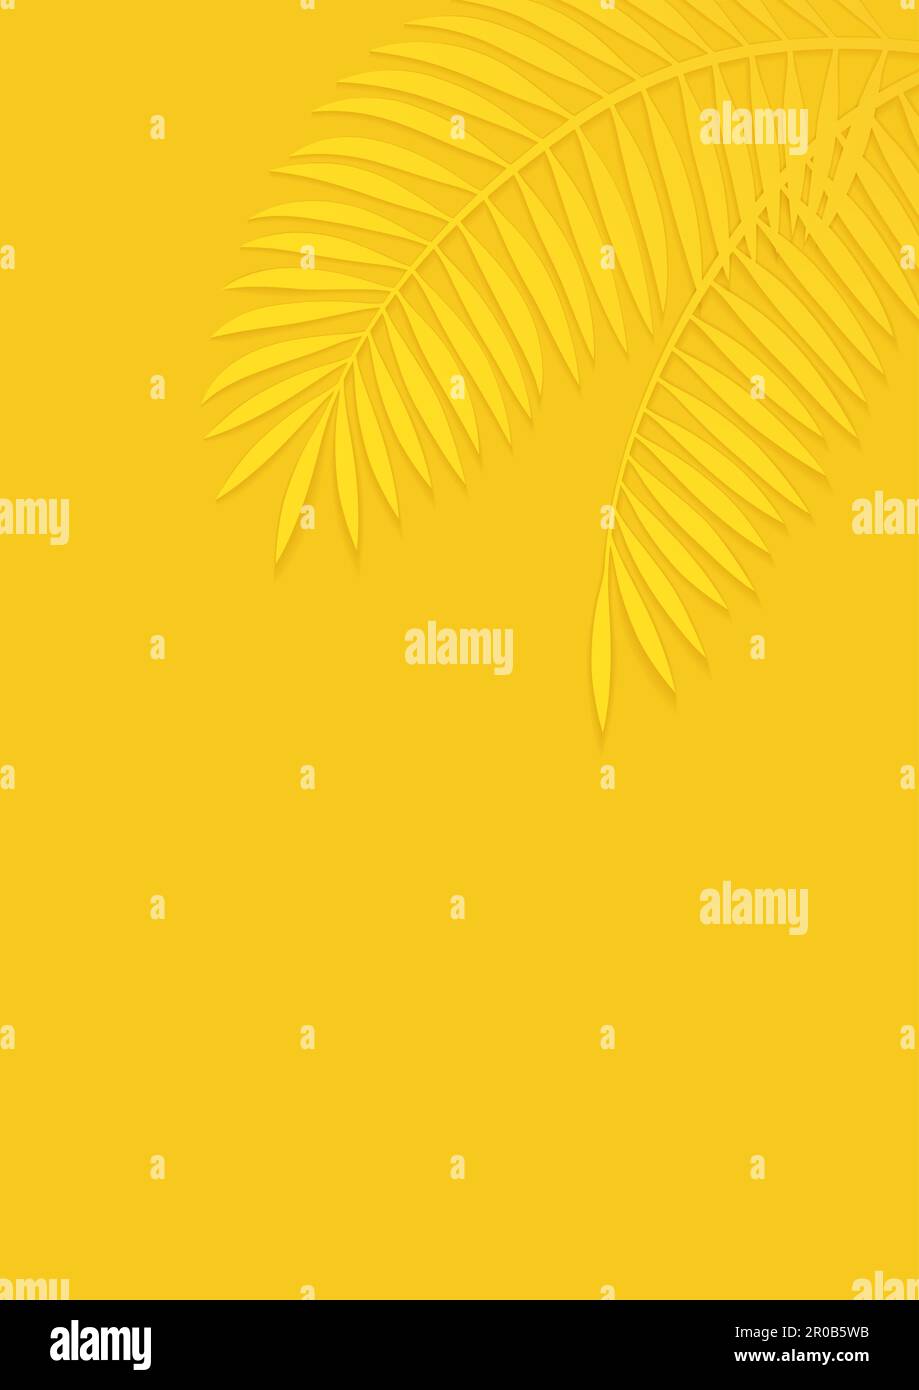 Vector Palm Leaf Silhouette Illustration With Text Space On A Vibrant Yellow Background. Stock Vector